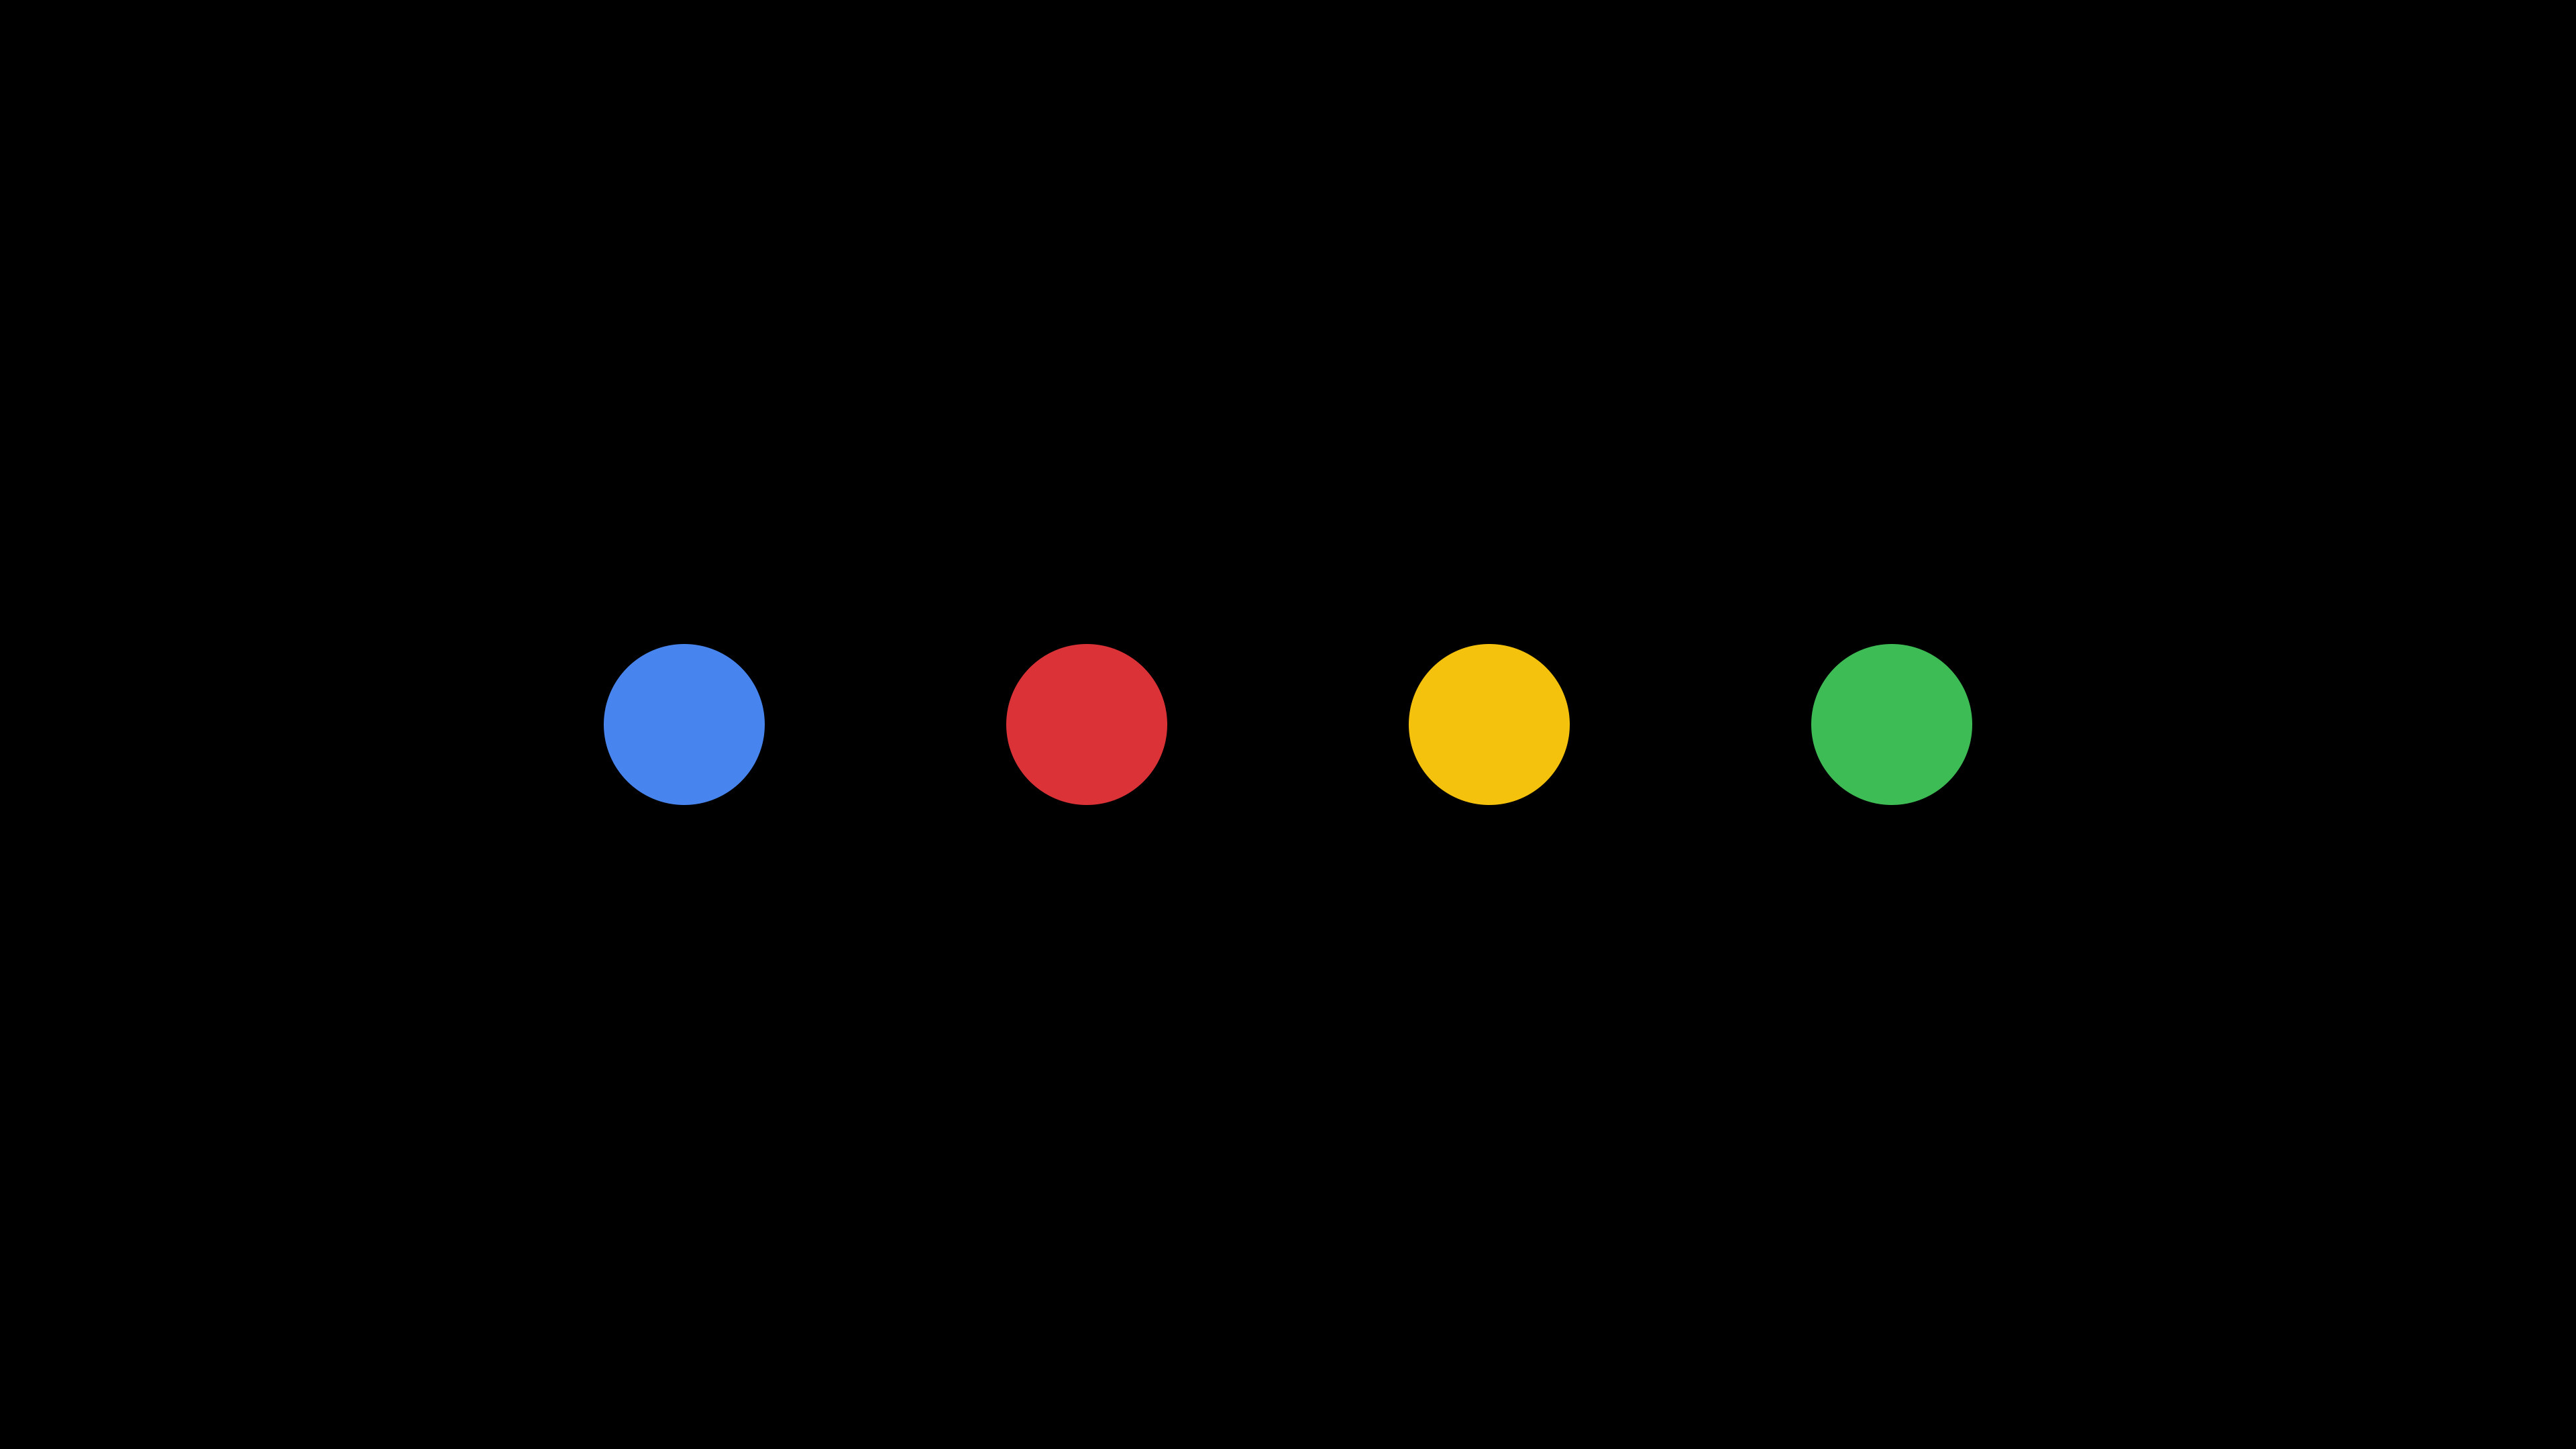 Google: The company's mission is to "organize the world's information and make it universally accessible and useful". 3840x2160 4K Background.